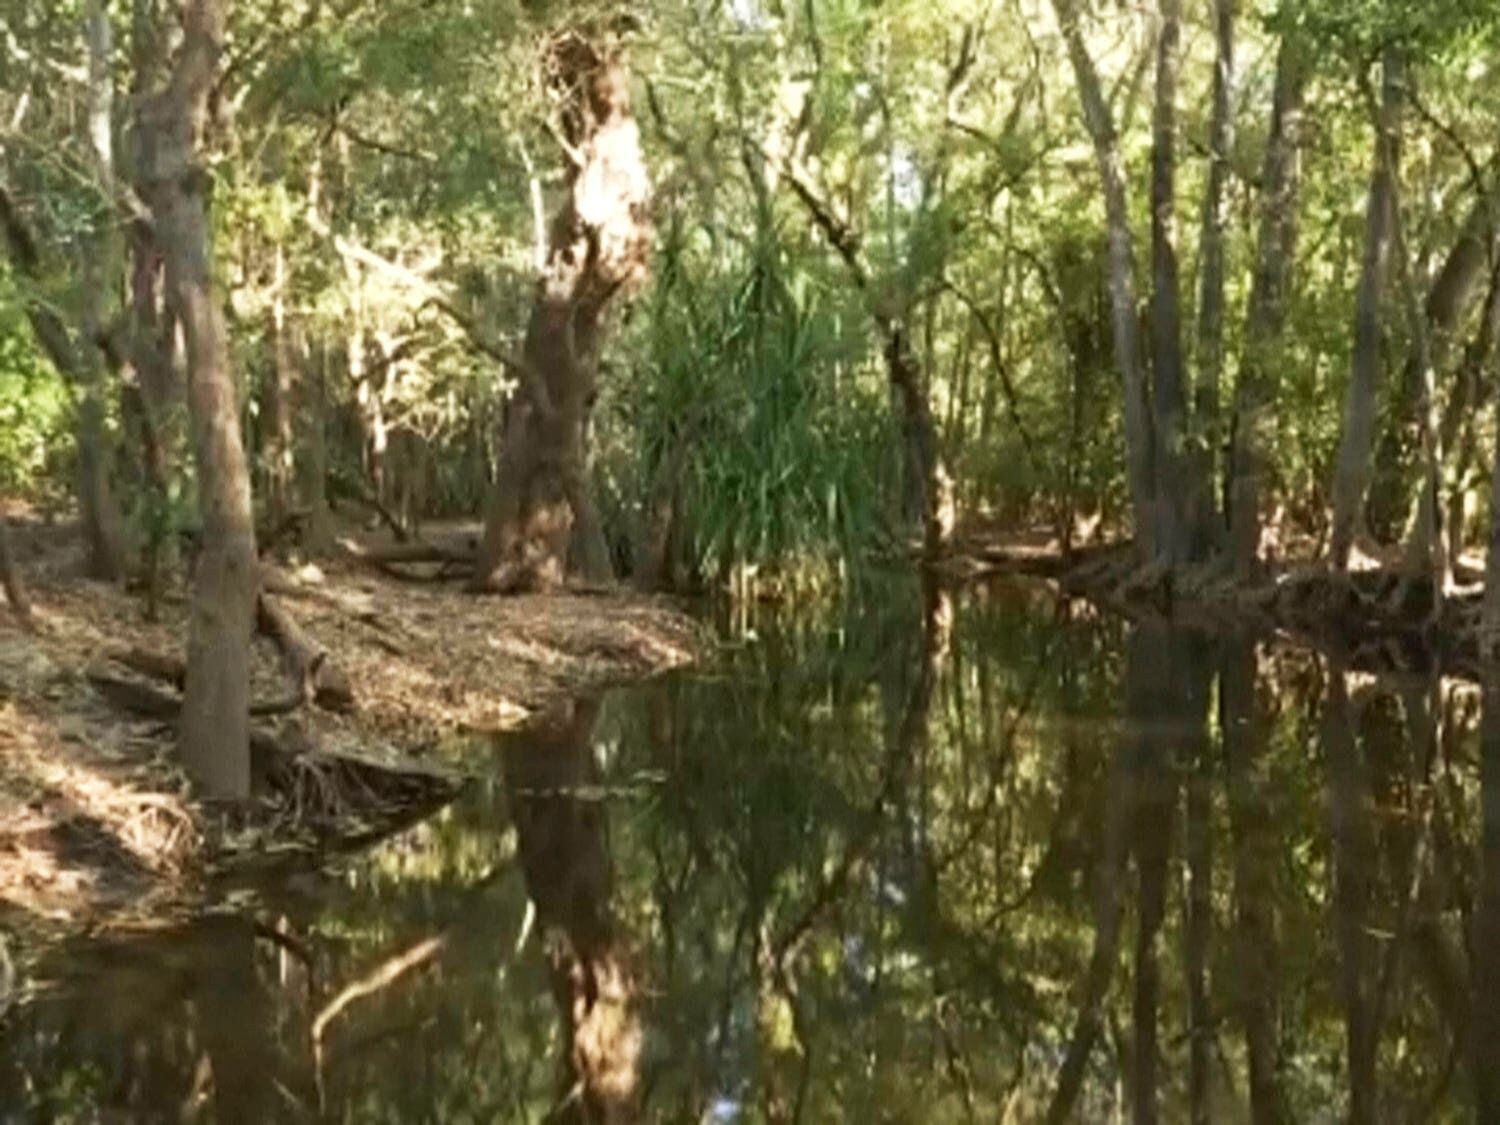 Crocodiles cannot outnumber people in area where girl was killed, leader says